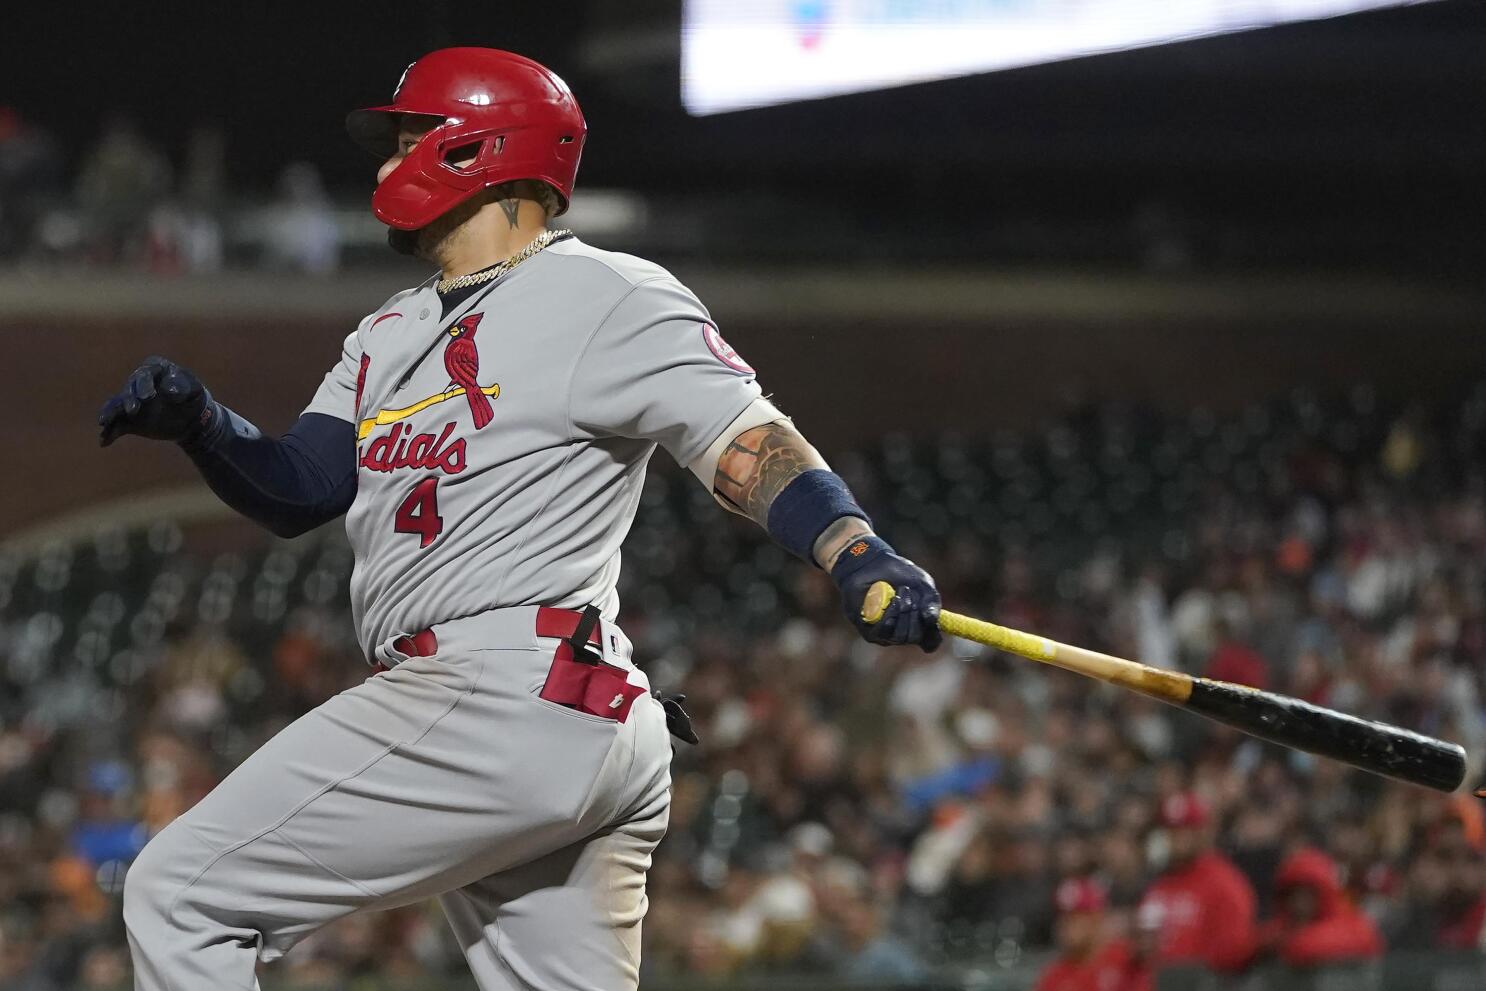 Cardinals' Yadier Molina Day-to-Day After Suffering Knee Injury vs